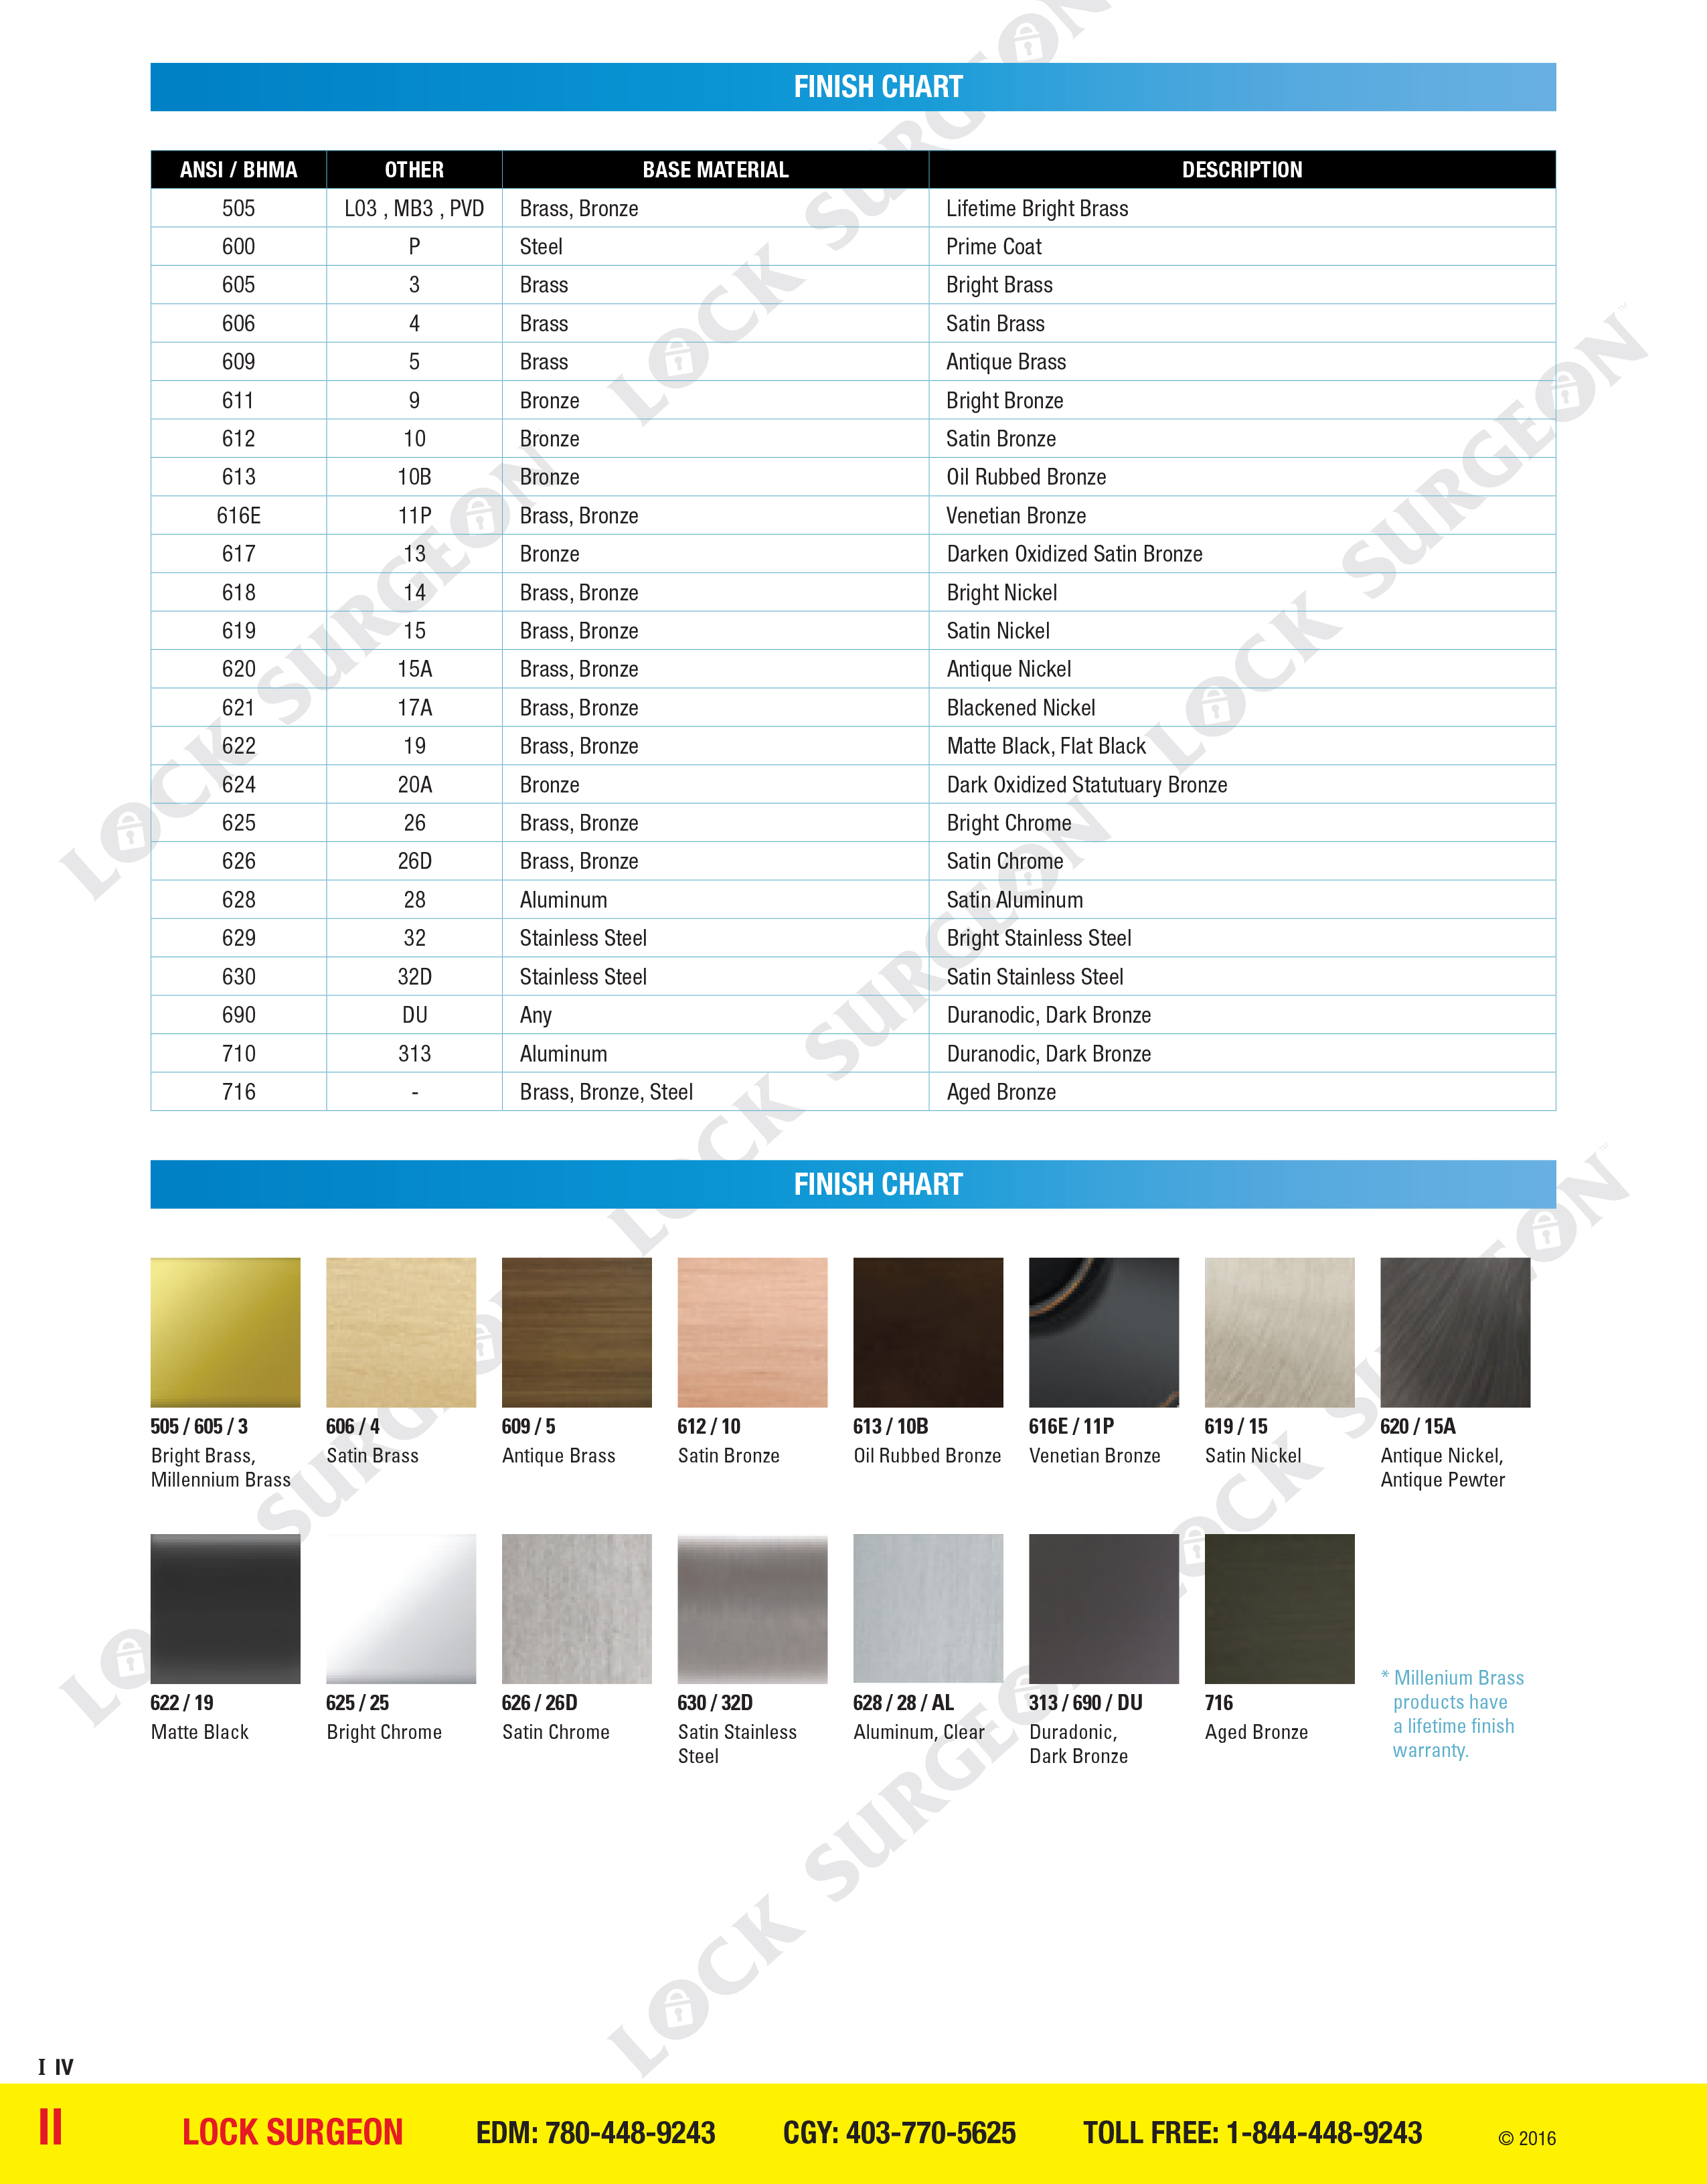 Colour reference chart for colour finishes on door handle hardware products Leduc.